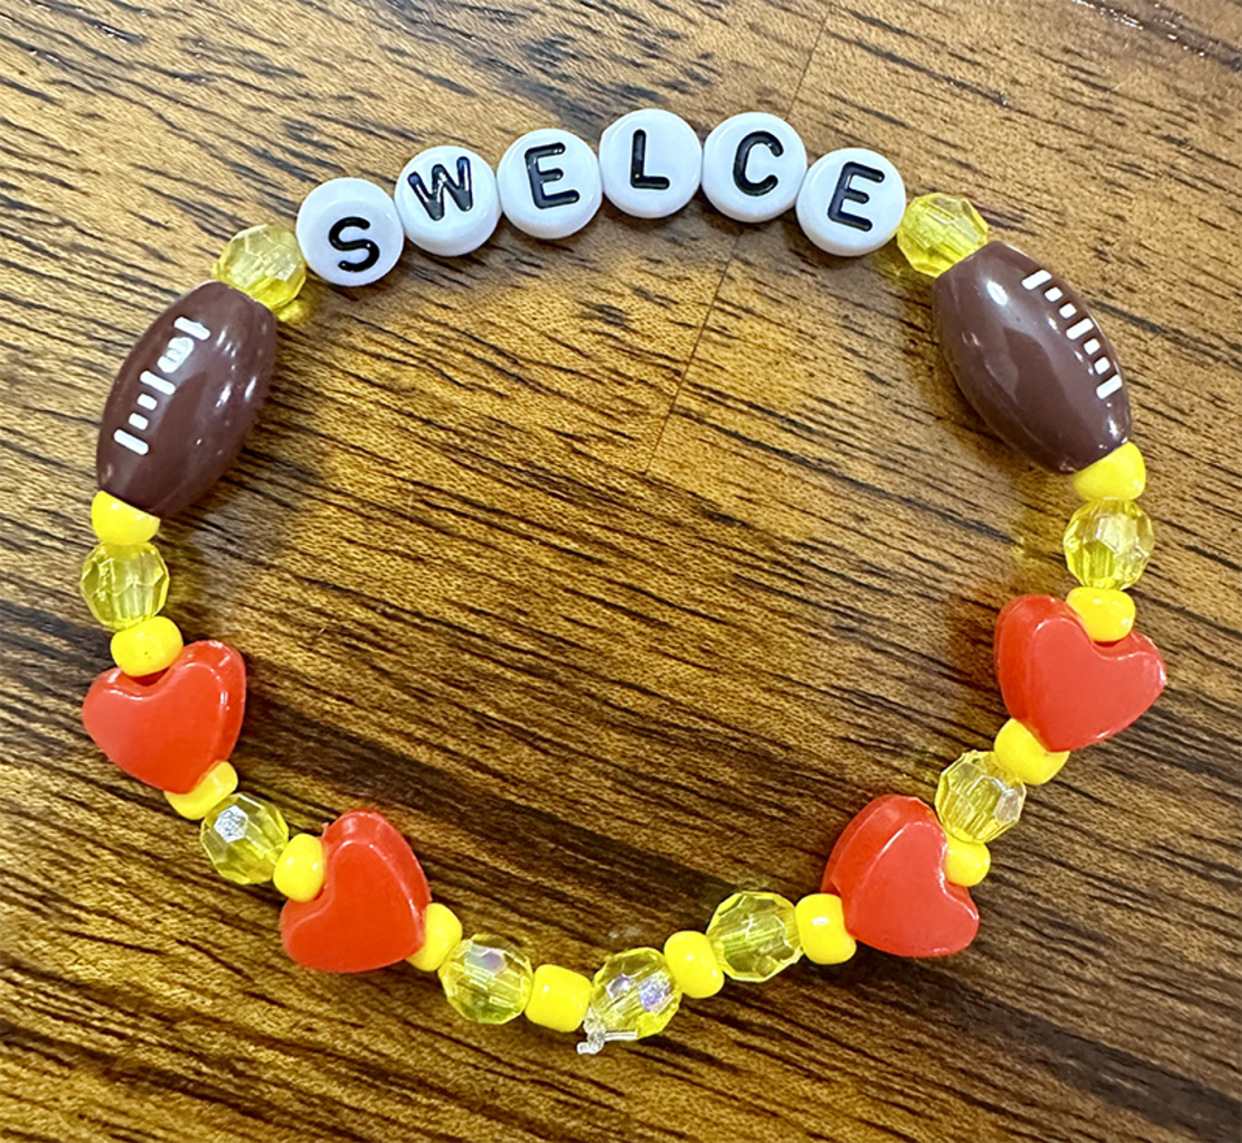 Bracelet with beads that spell out 